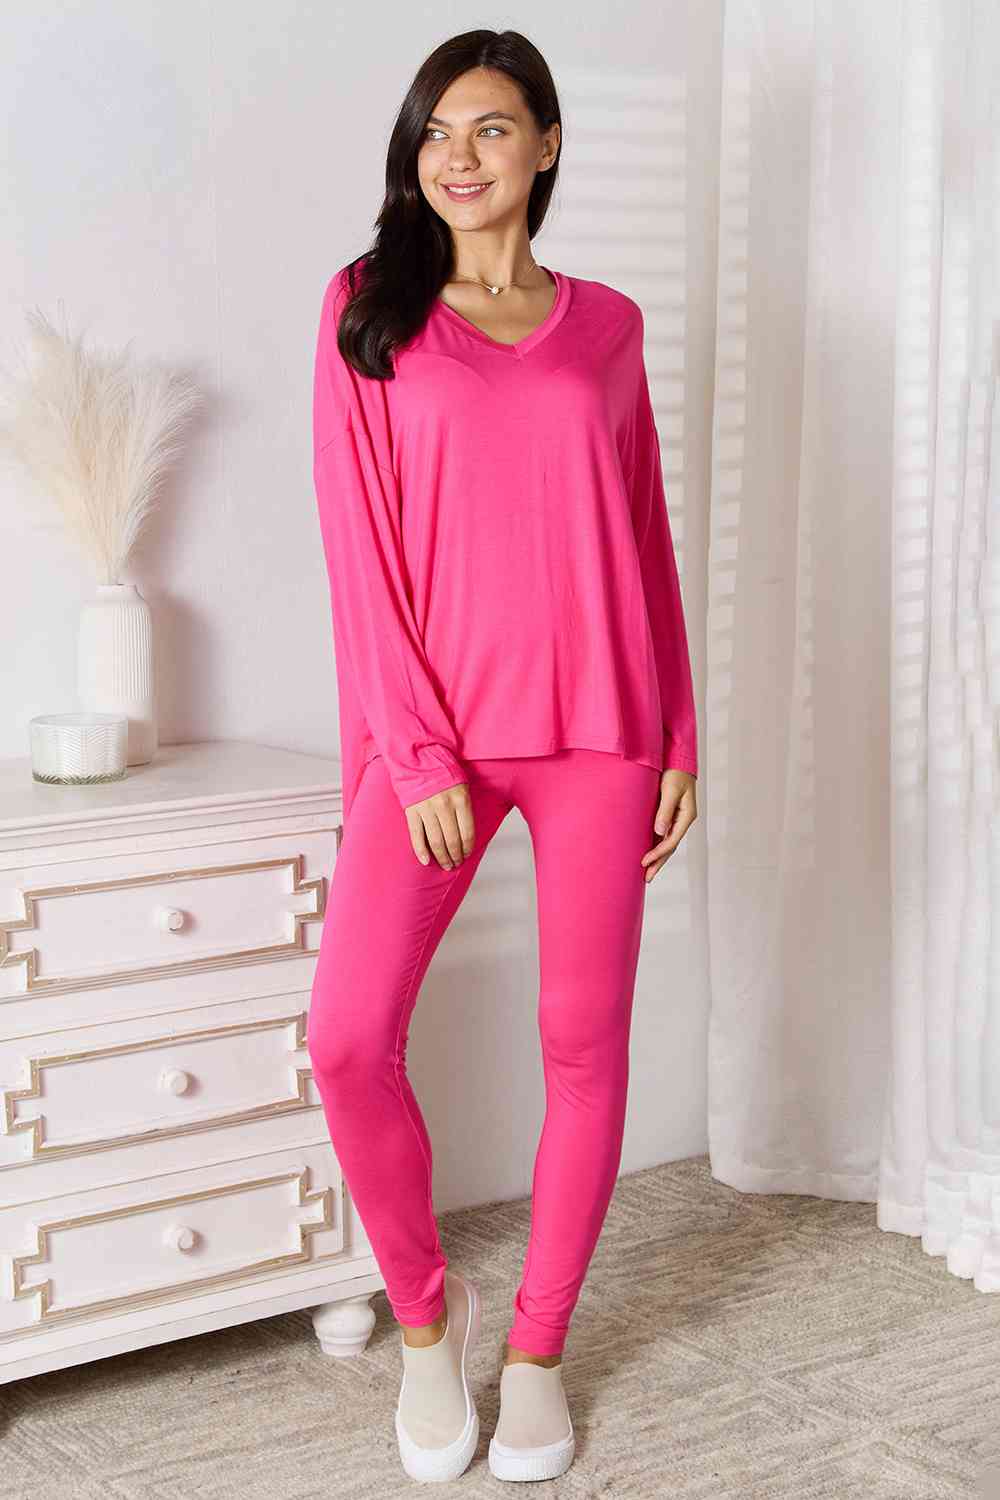 V-Neck Soft Rayon Long Sleeve Top and Pants Lounge Set - Hot Pink / S - Bottoms - Outfit Sets - 1 - 2024